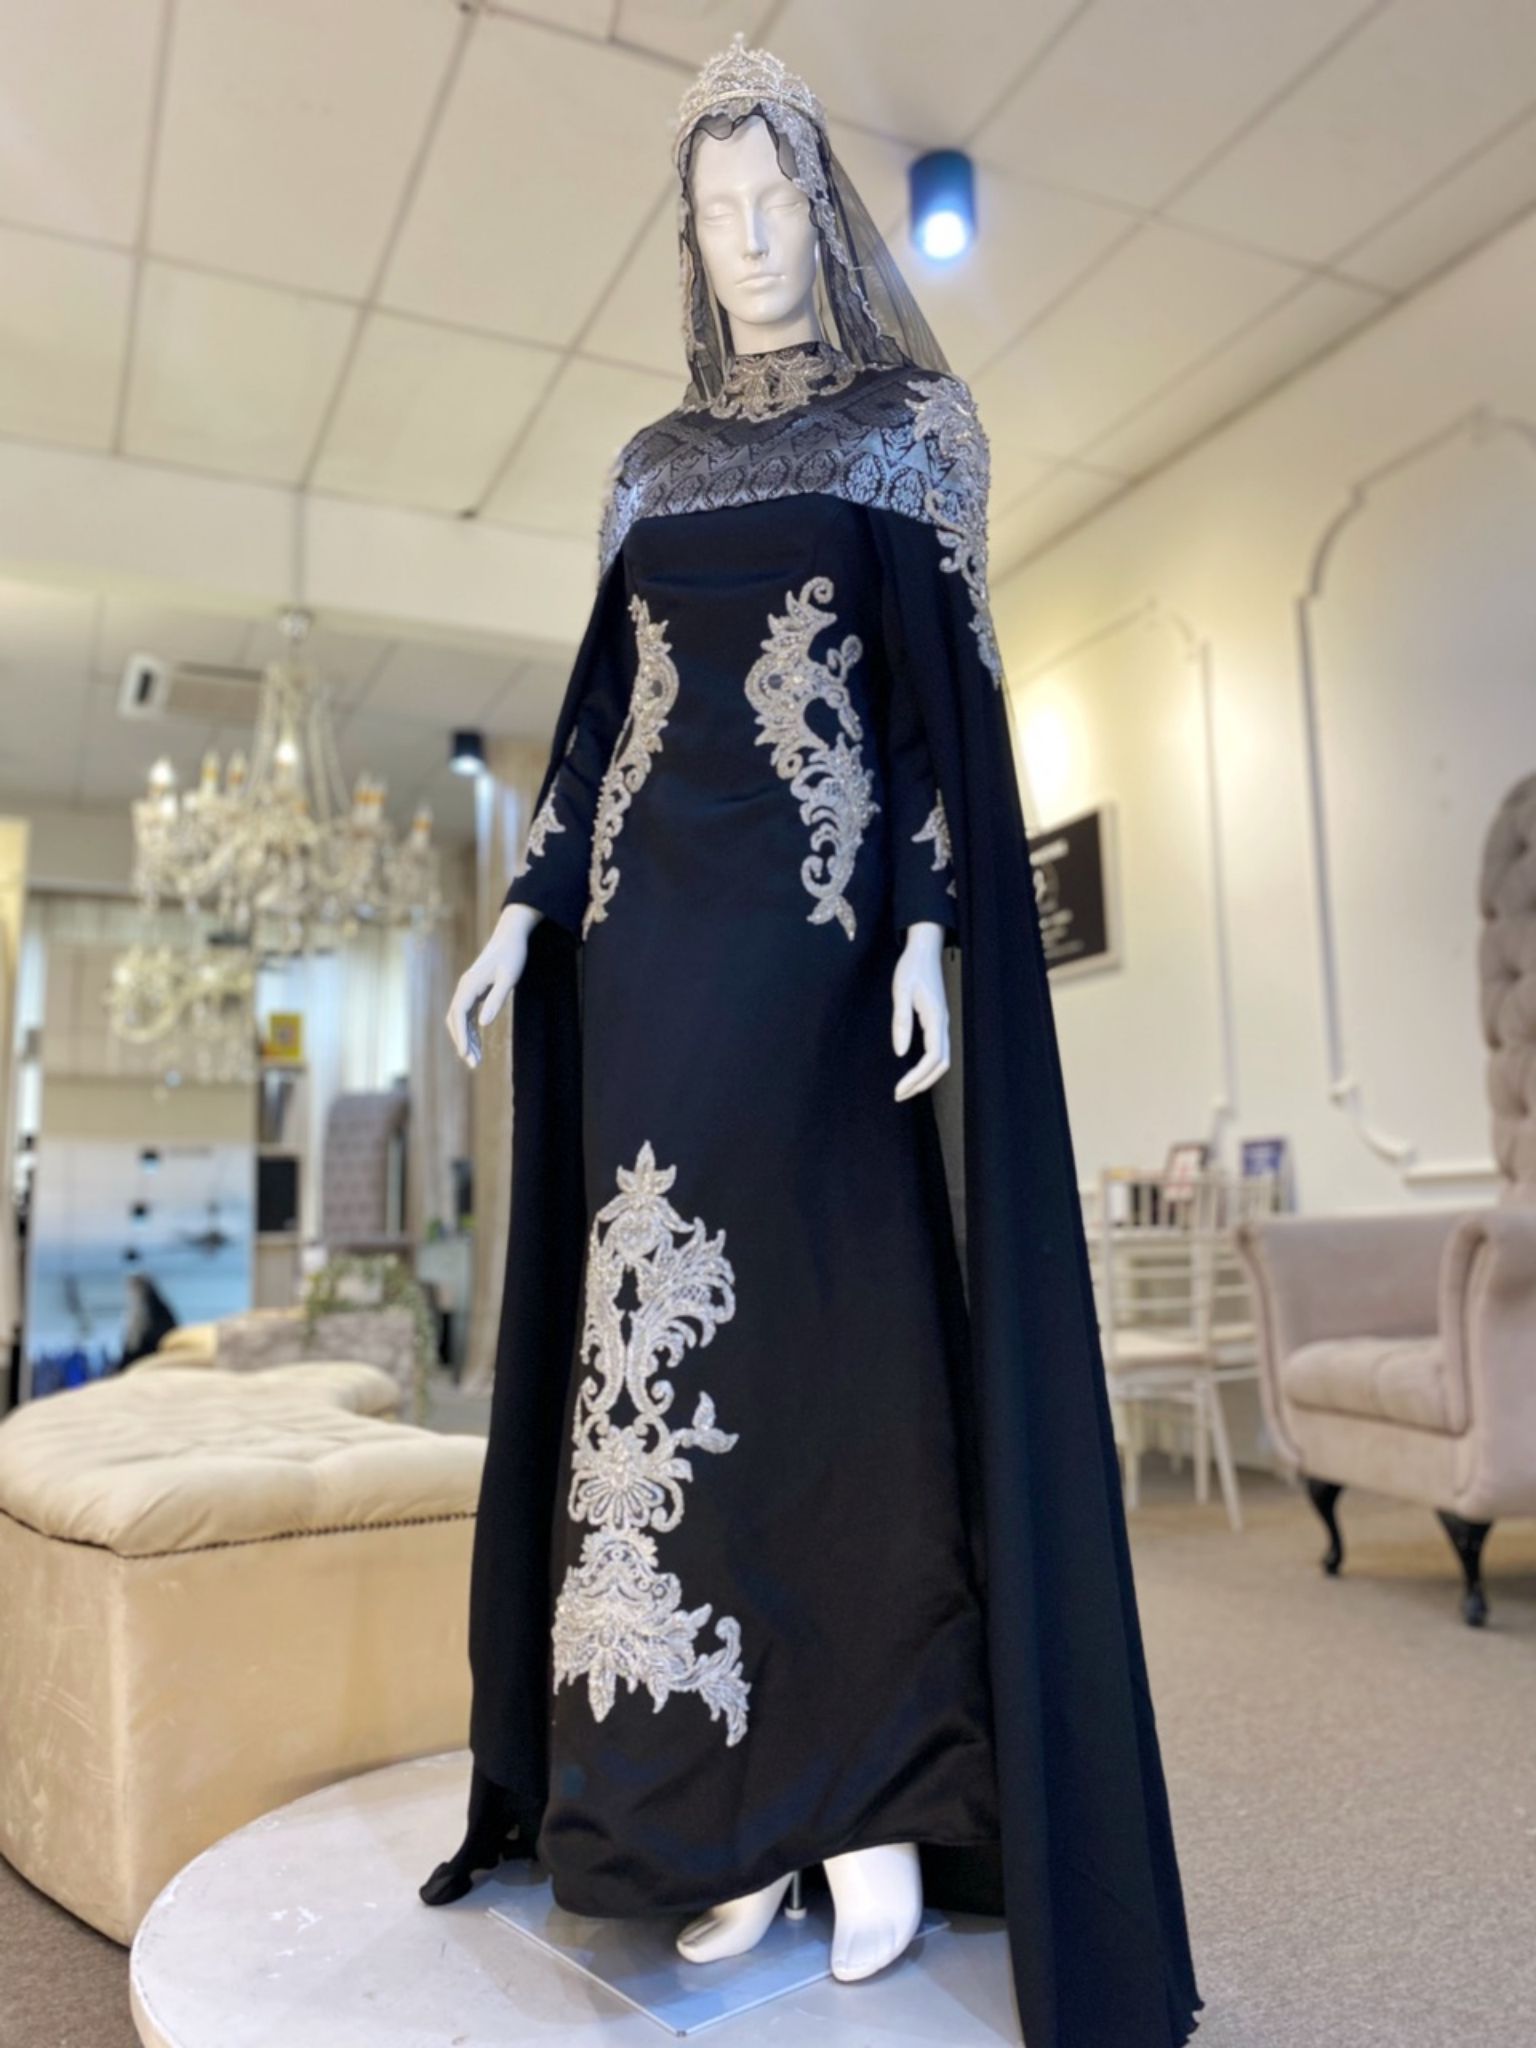 MALEFICENT - Baju Sanding Black A-Line Wedding Dress with Detachable Cape | Photos of beautiful baju sanding that is perfect for a traditional yet stylish wedding day. The black color is both elegant and versatile, and the intricate embroidery and lacework make it a truly unique and eye-catching garment. This baju sanding is sure to turn heads on your big day.